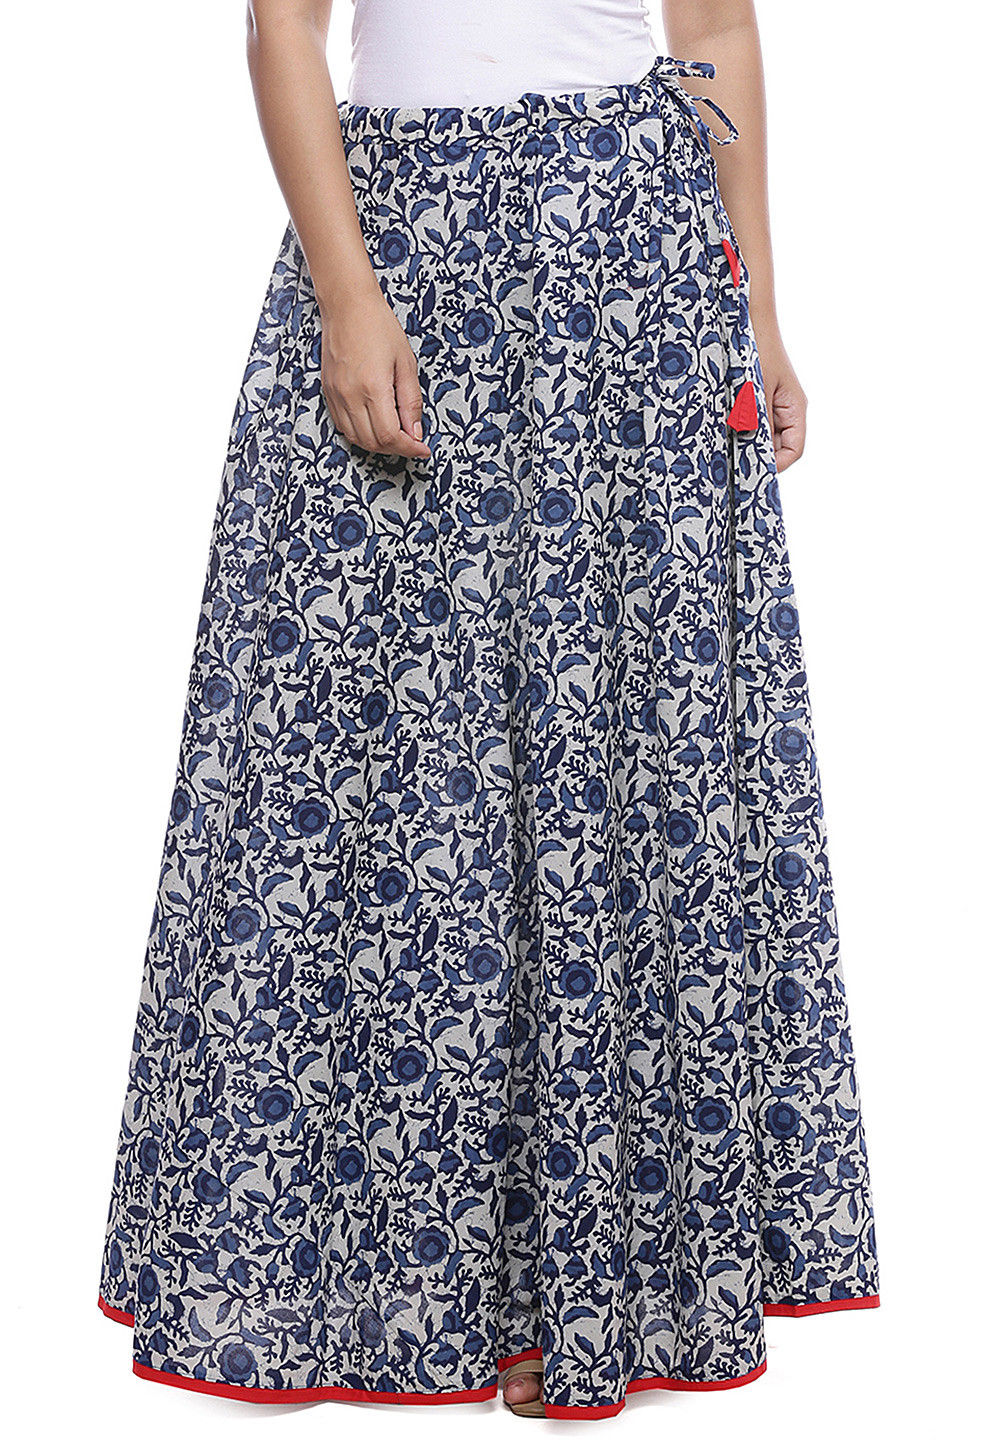 Buy Block Printed Cotton Skirt in Off White and Blue Online : BRJ424 ...